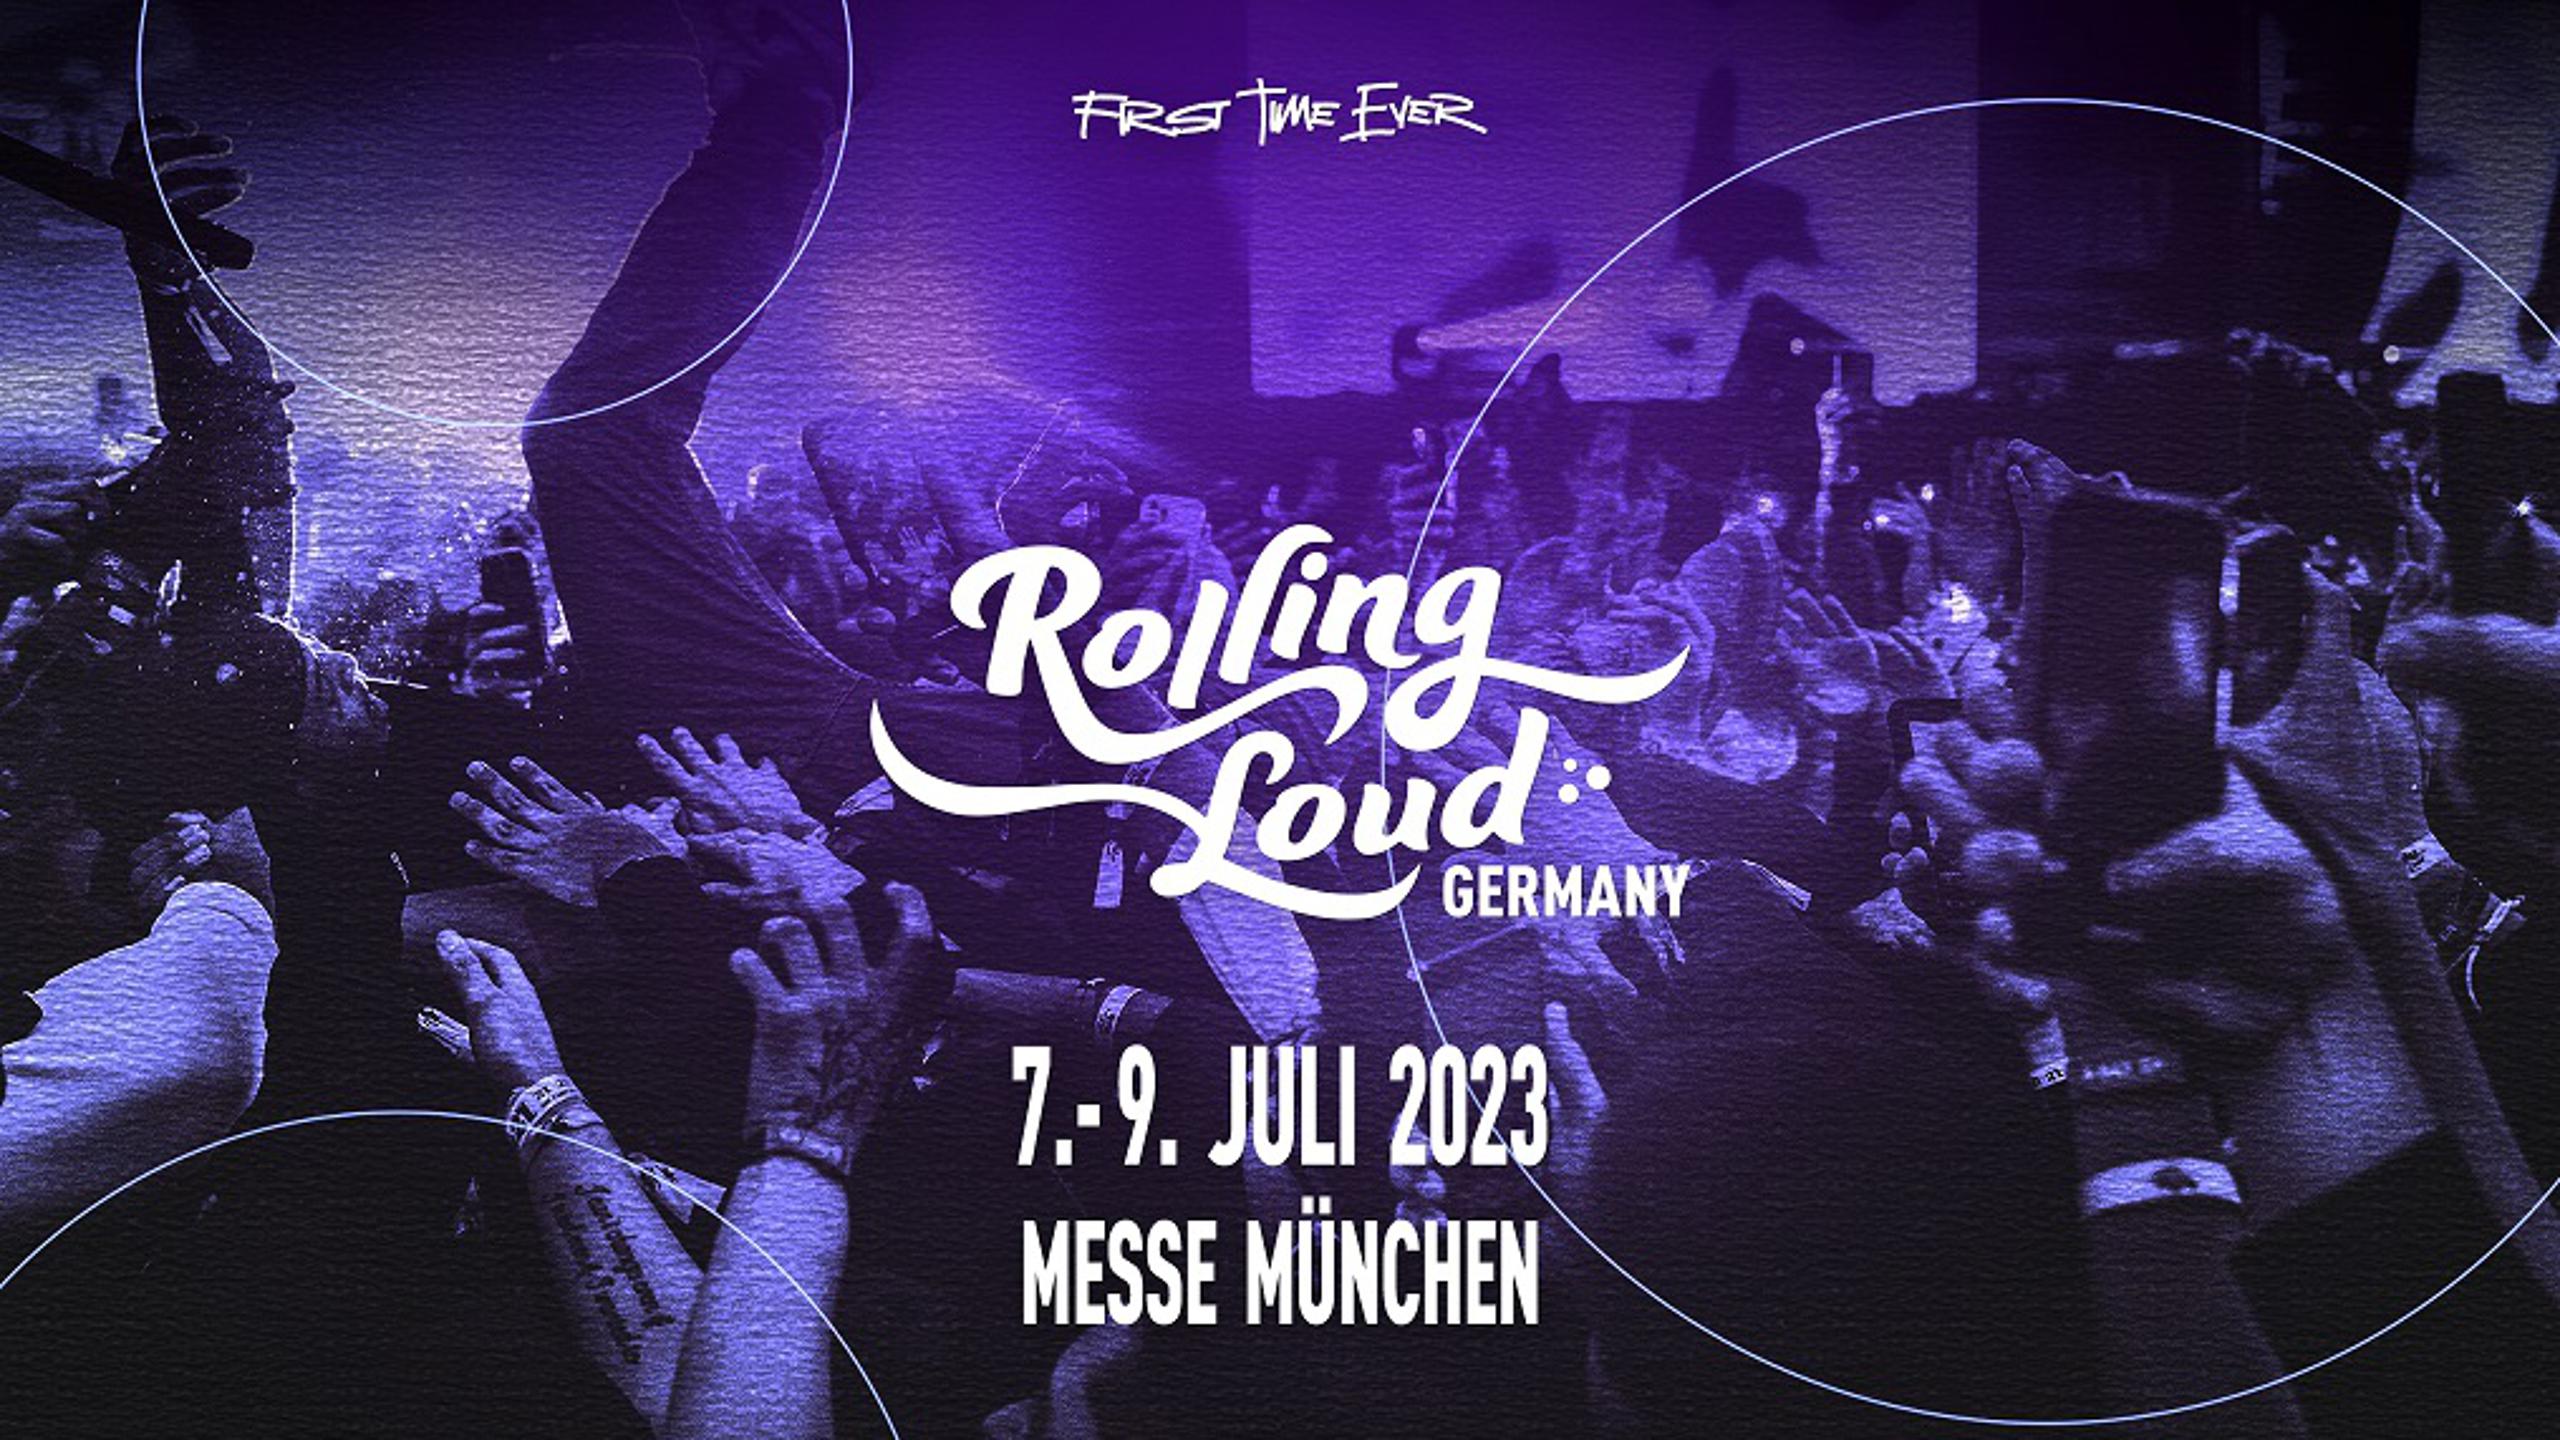 Rolling Loud Germany. Tickets, lineup, bands for Rolling Loud Germany